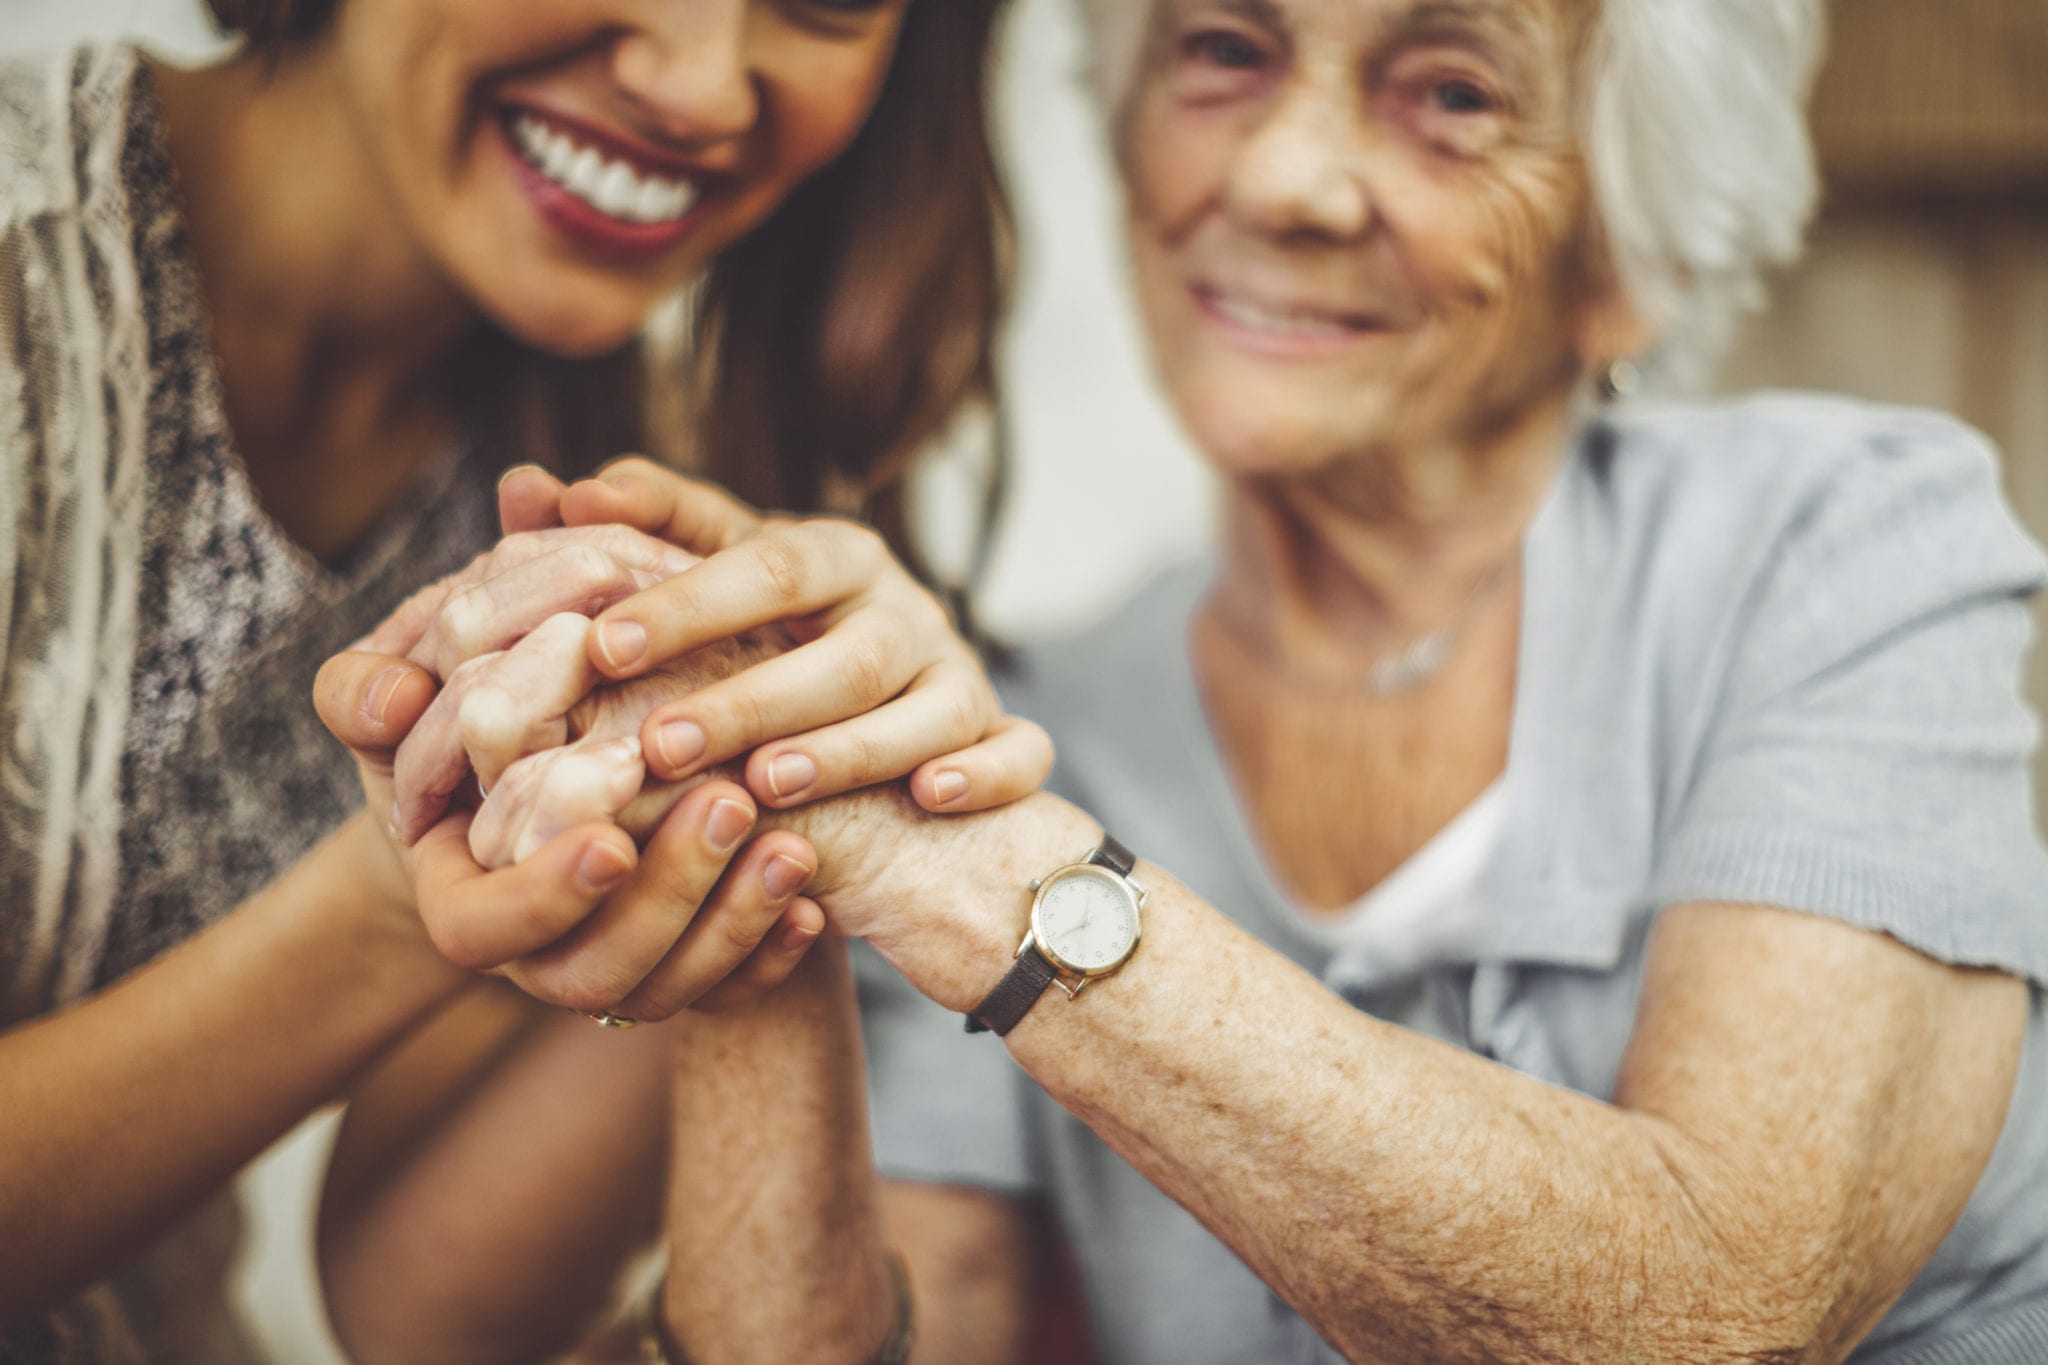 Female caregiver holding hands with elderly woman